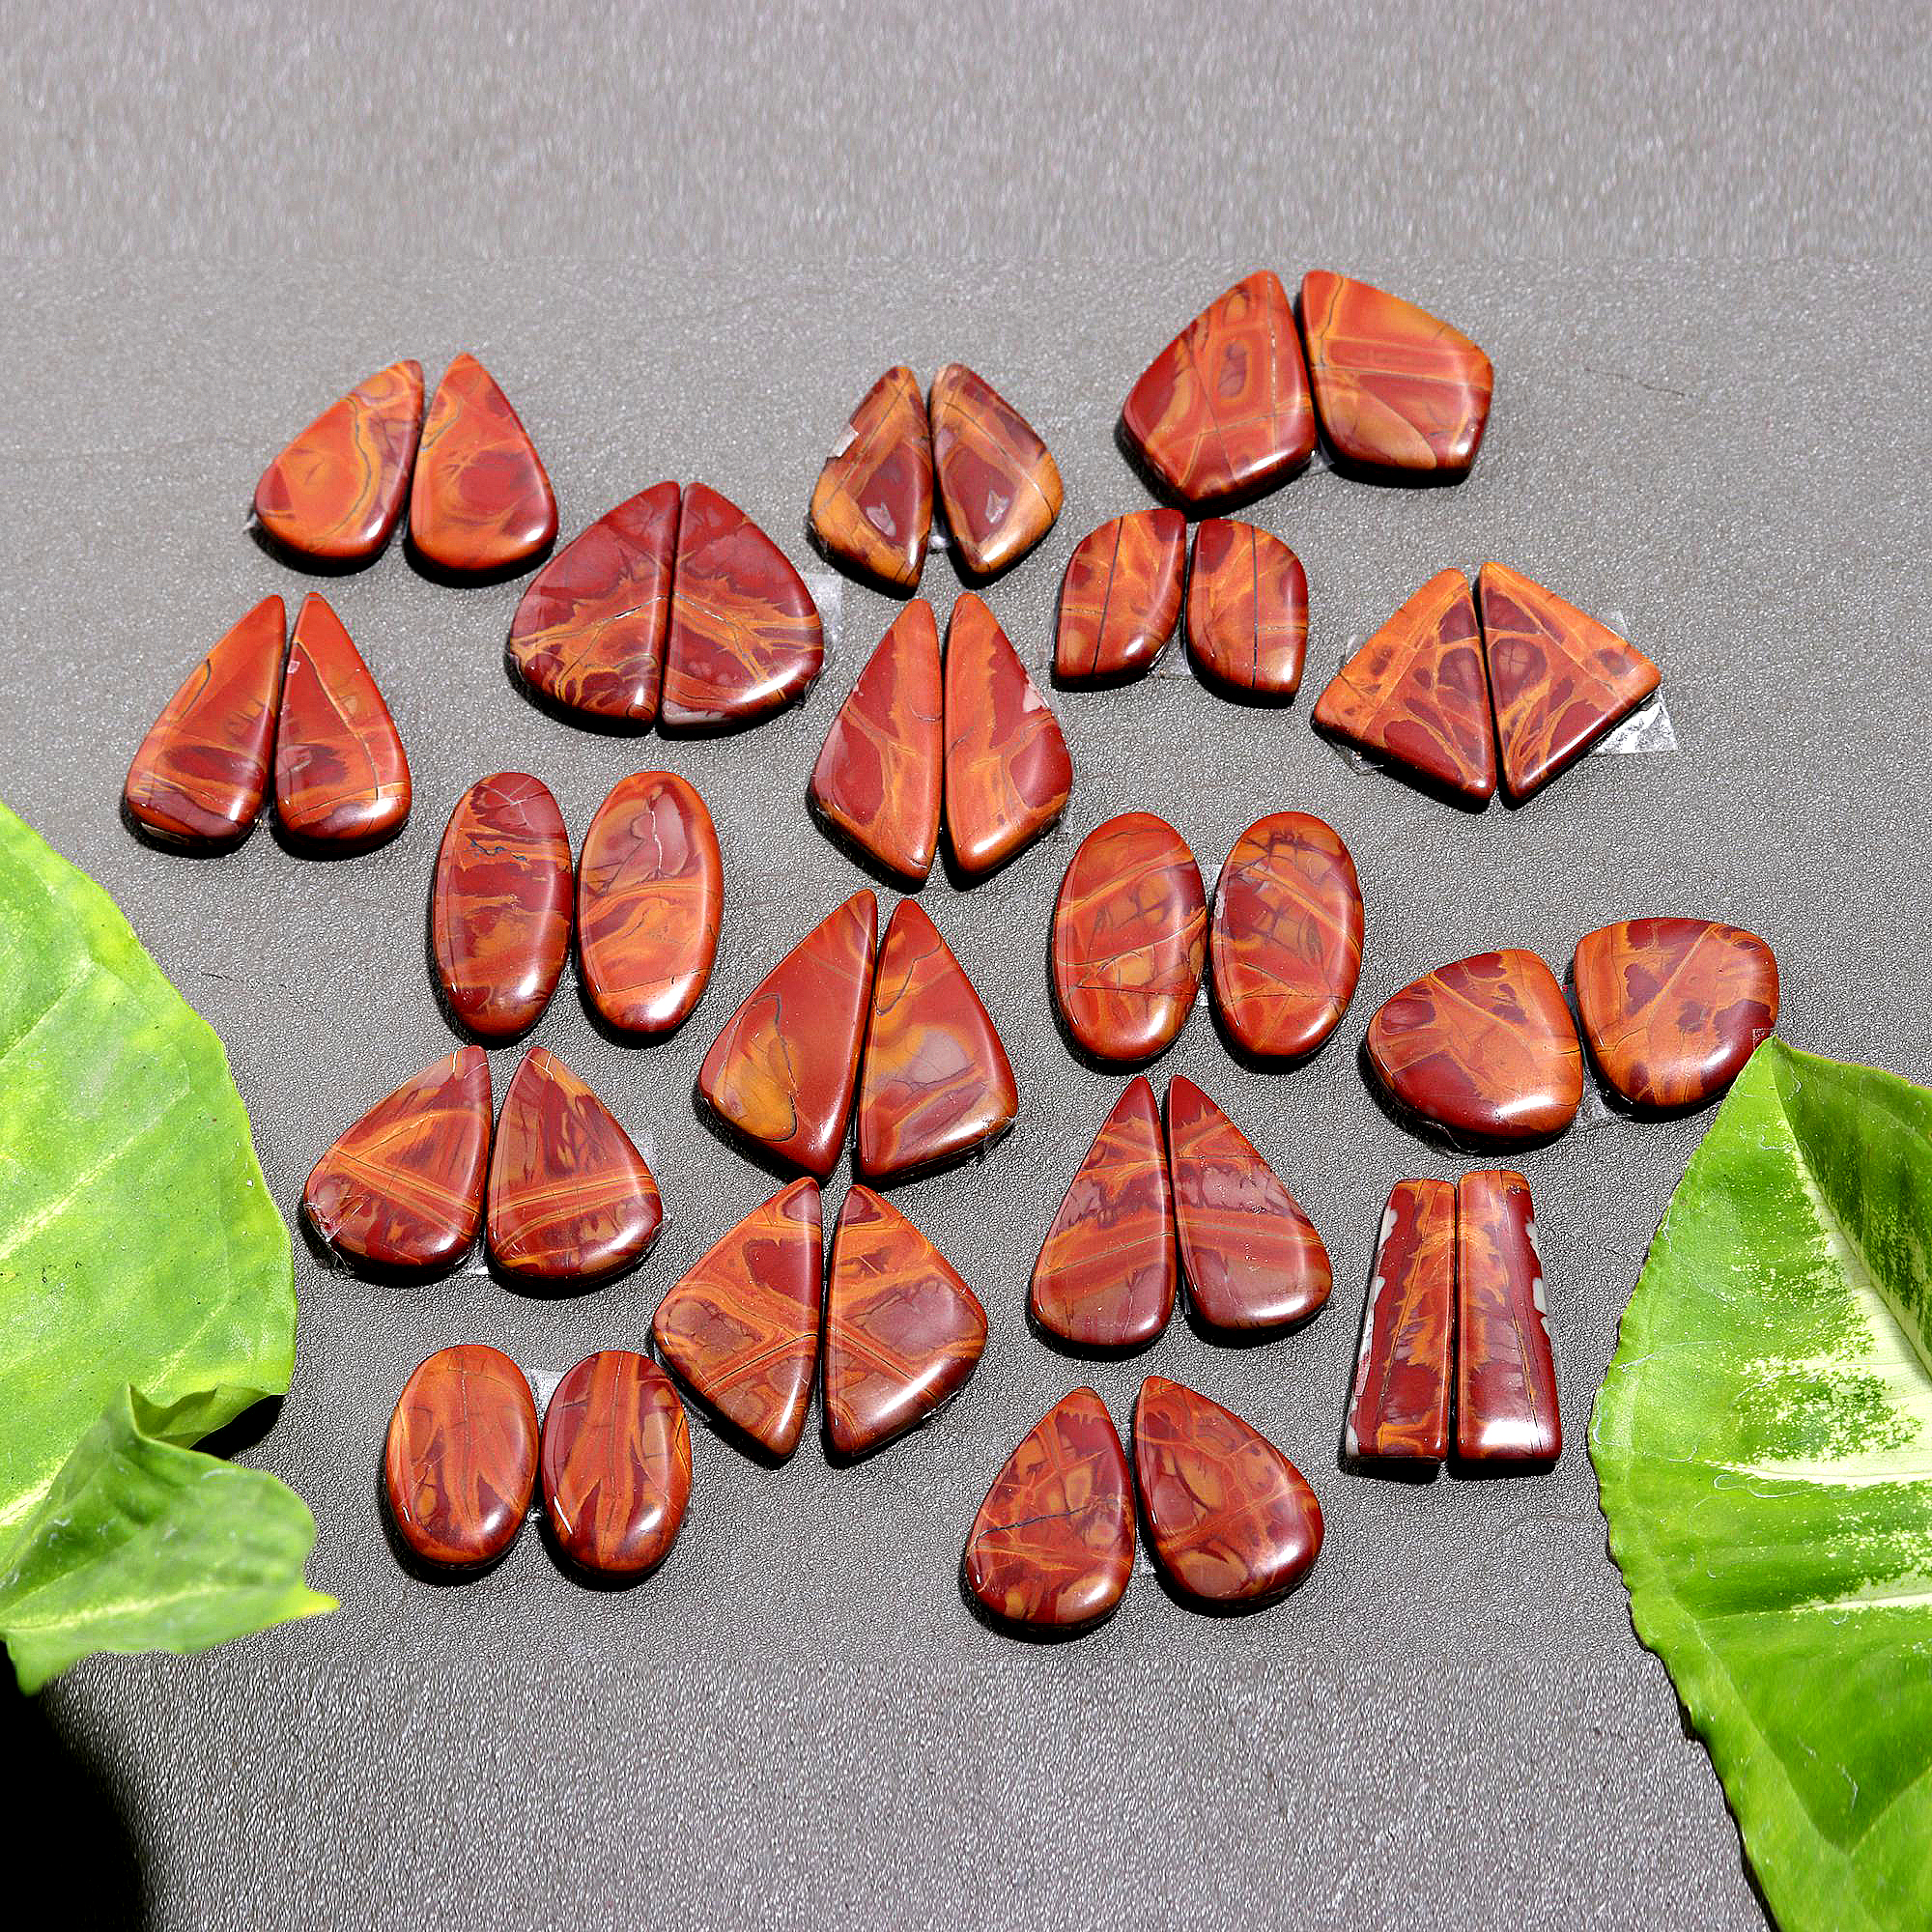 18Pair 264Cts.Natural Smooth Noreena Jasper Matched Earring Pair Mix Loose Gemstone Cabochon Pair Lot Size 23x10 15x7mm